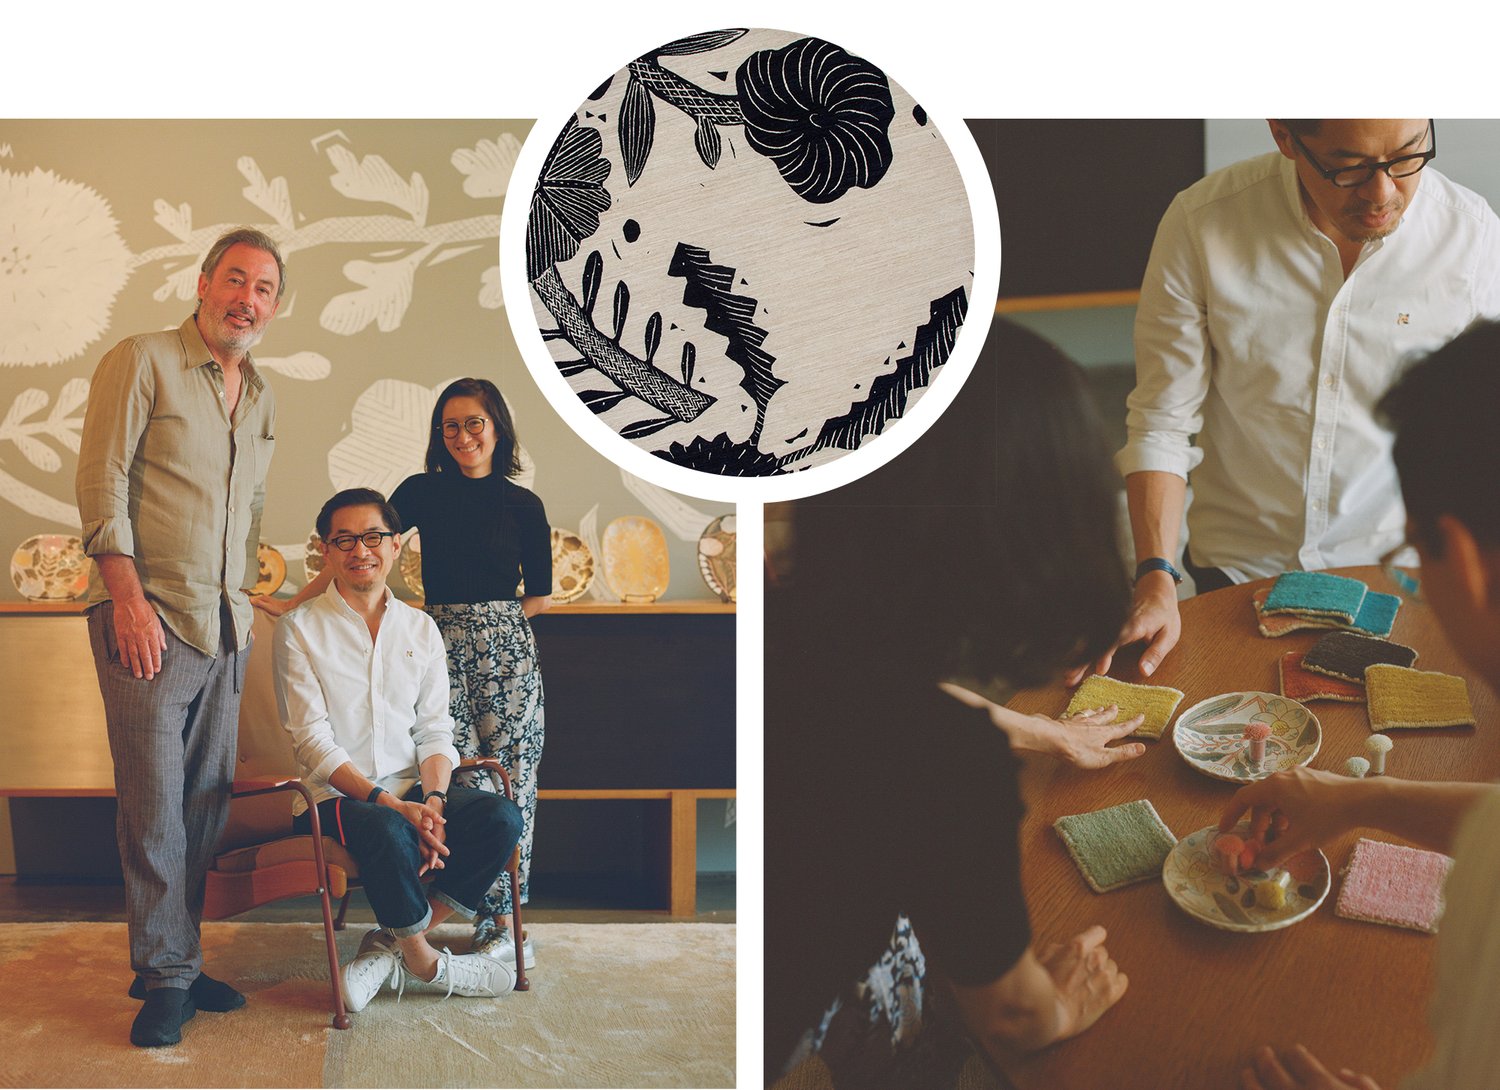 Three images: On left, two men and a woman posed for camera. On right, the design team at work picking fabrics and elements. Inset image is a closeup of a graphic pattern.